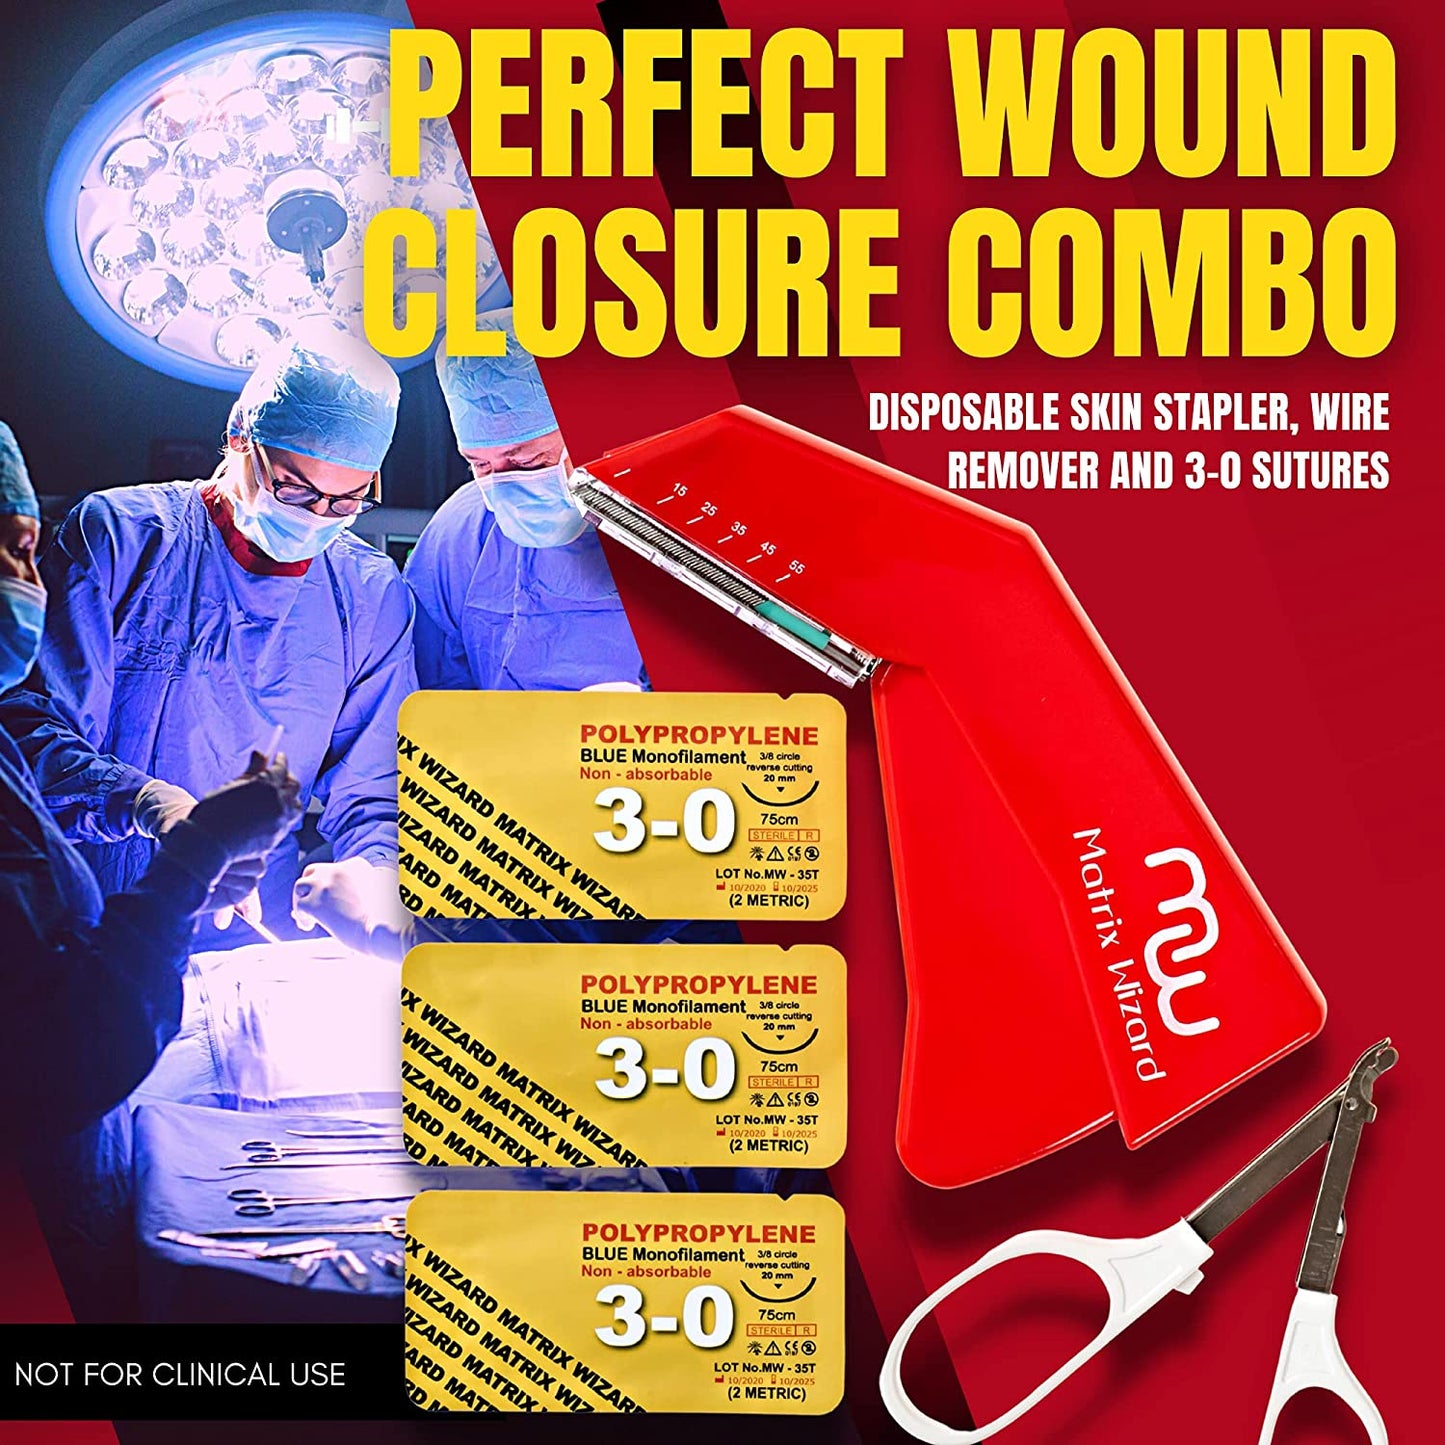 Sterile Suture Thread with Needle Plus Disposable Preloaded 55 Wire Stapler Tool - Medics, EMT, Nursing First Aid Surgical Suture Practice Kit; Wound Training Set; Vet Use